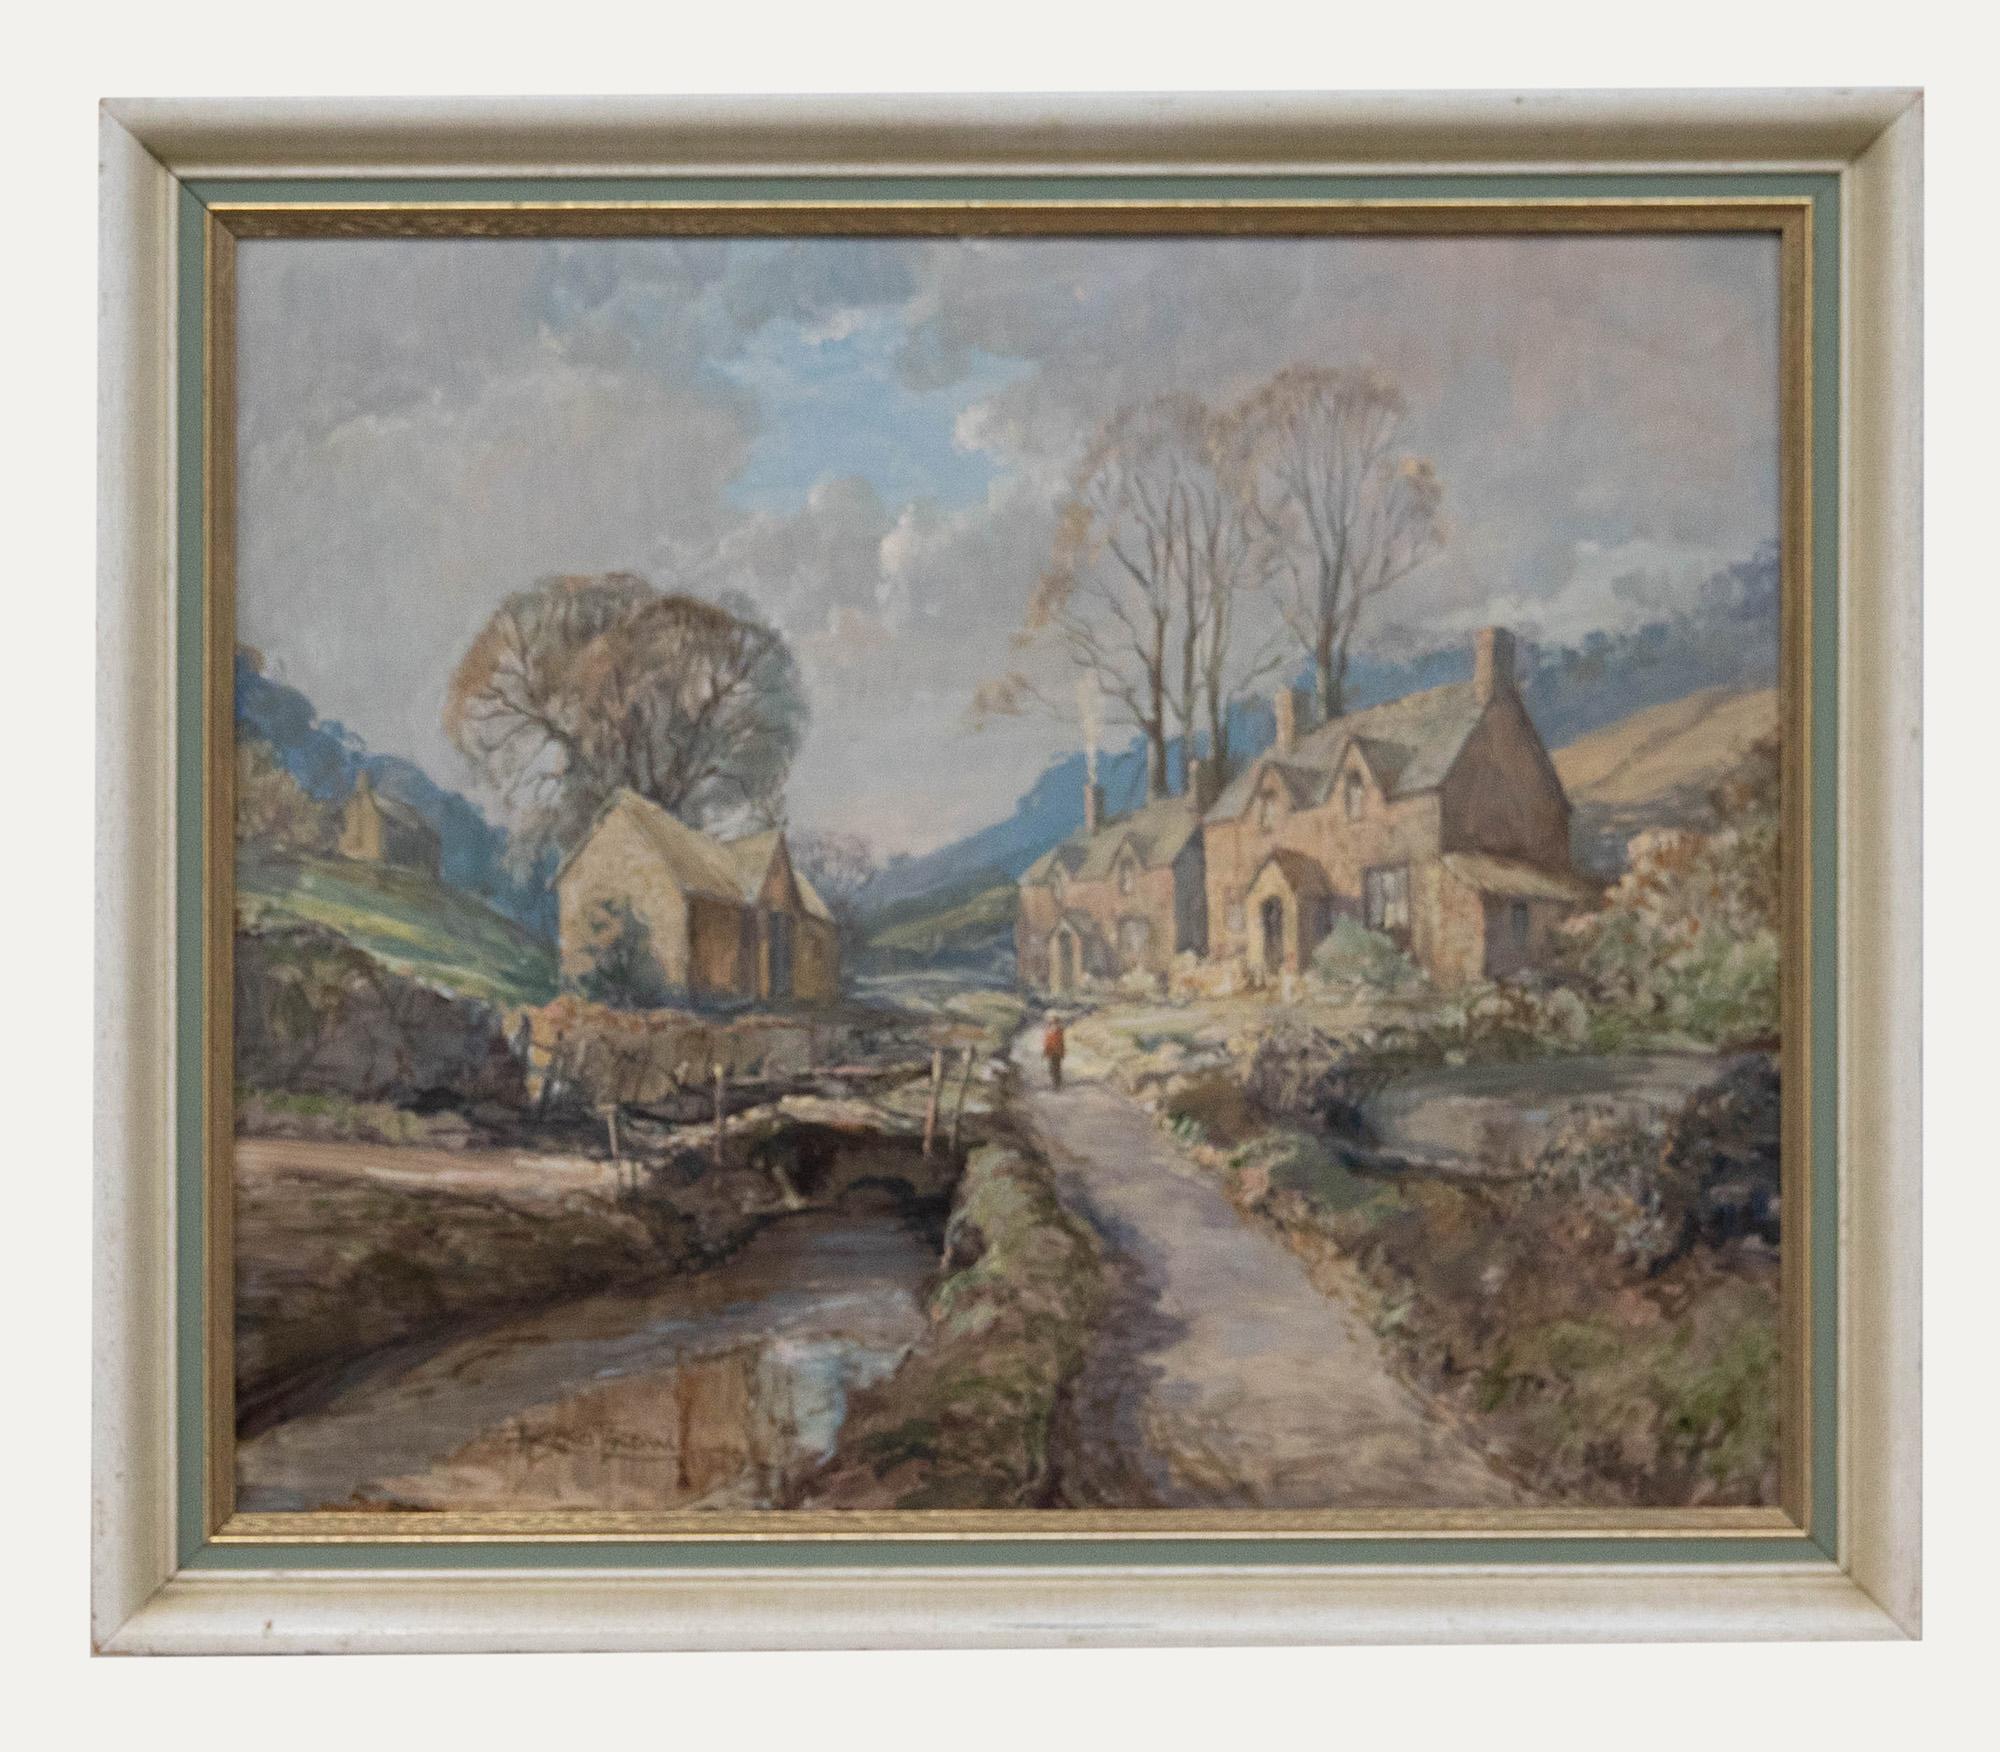 Unknown Landscape Painting - R. G. Trow - Framed 20th Century Oil, Stow-on-the-Wold